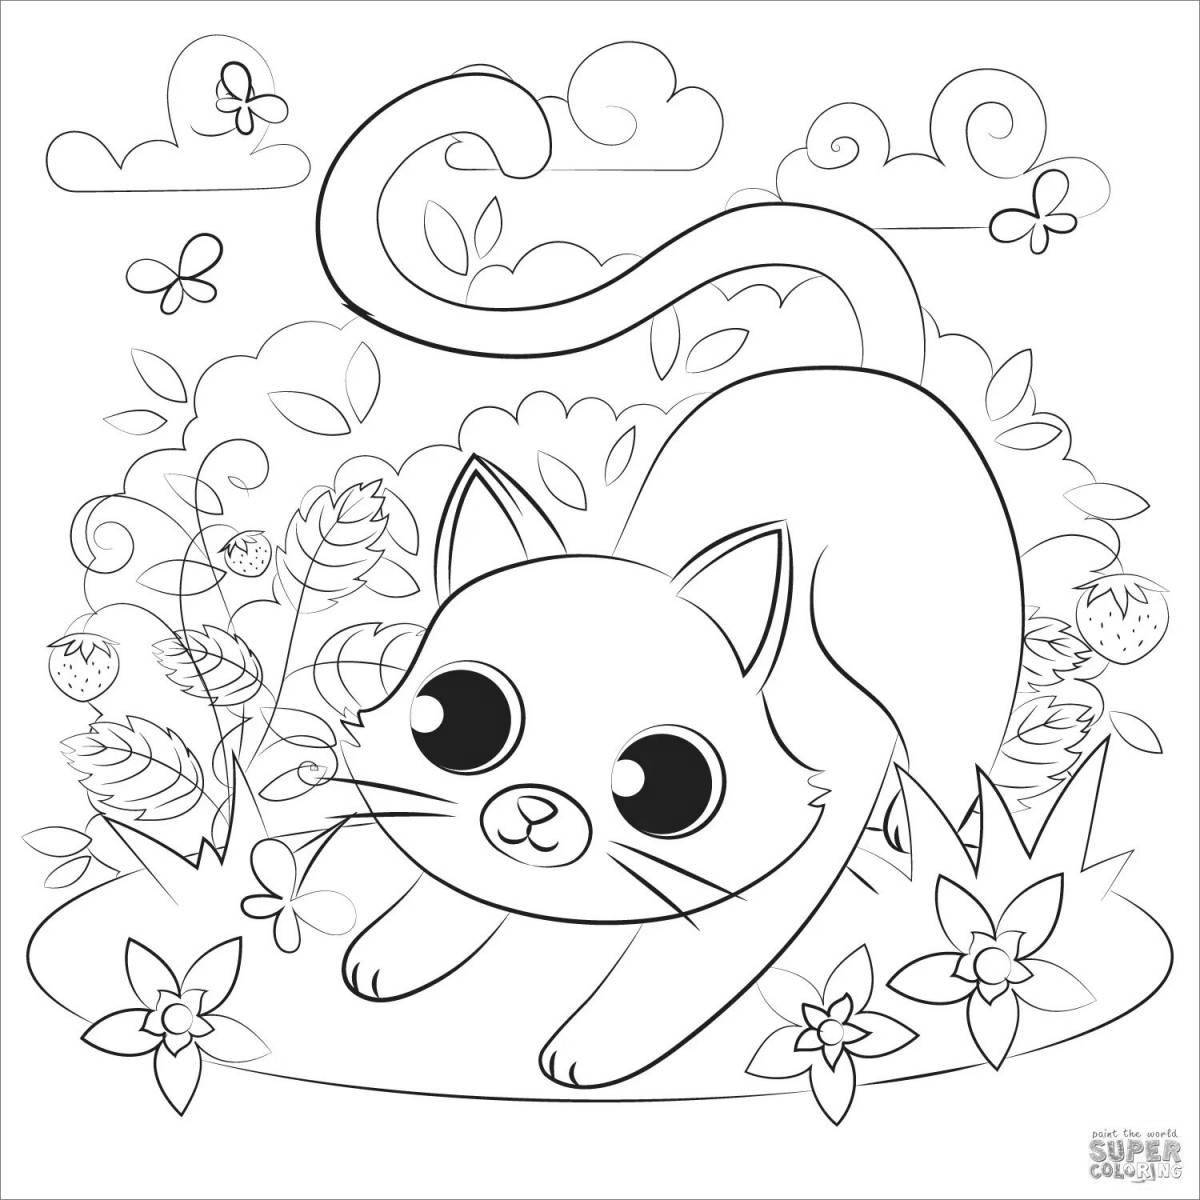 Bright coloring book for girls 7 years old cats